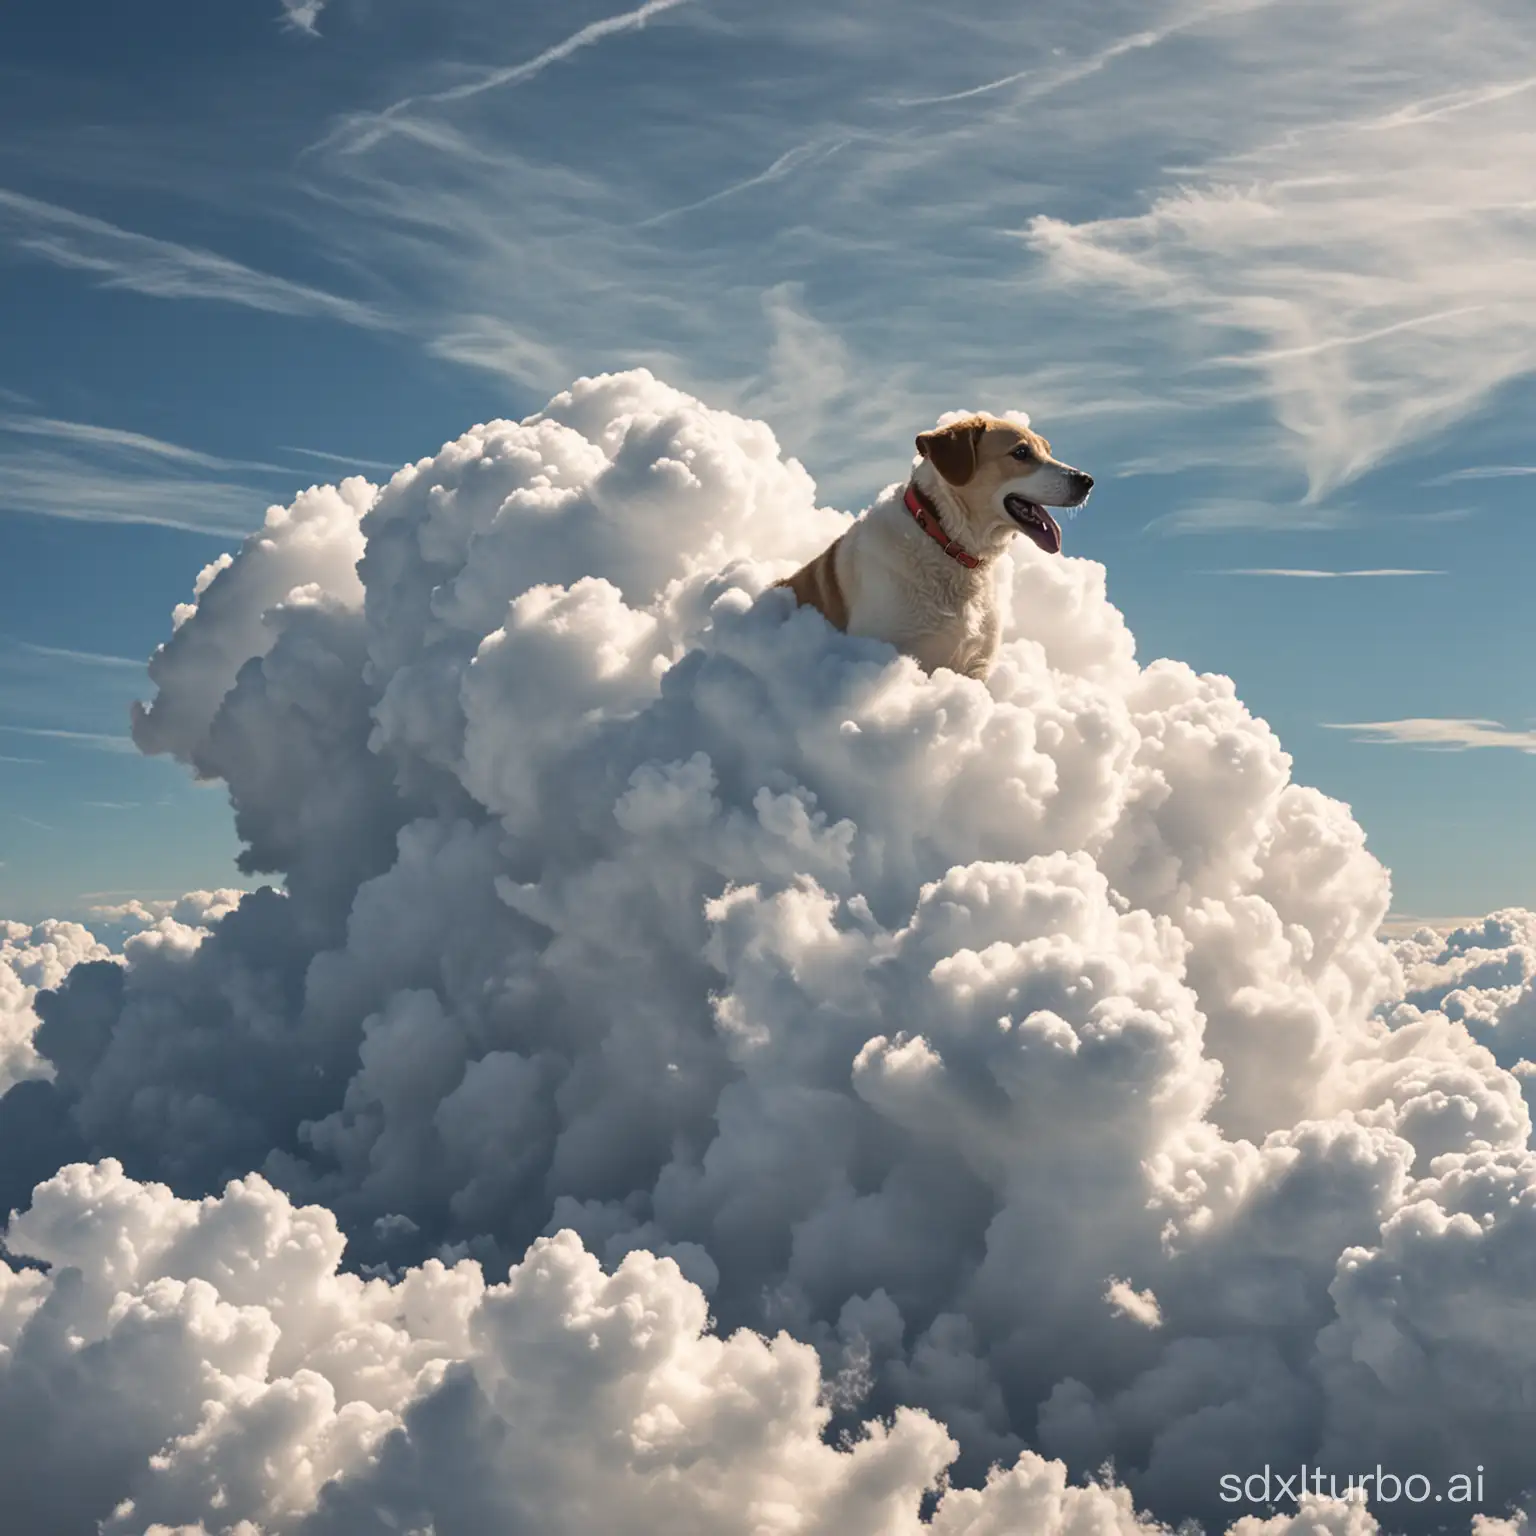 The DOG in the cloud